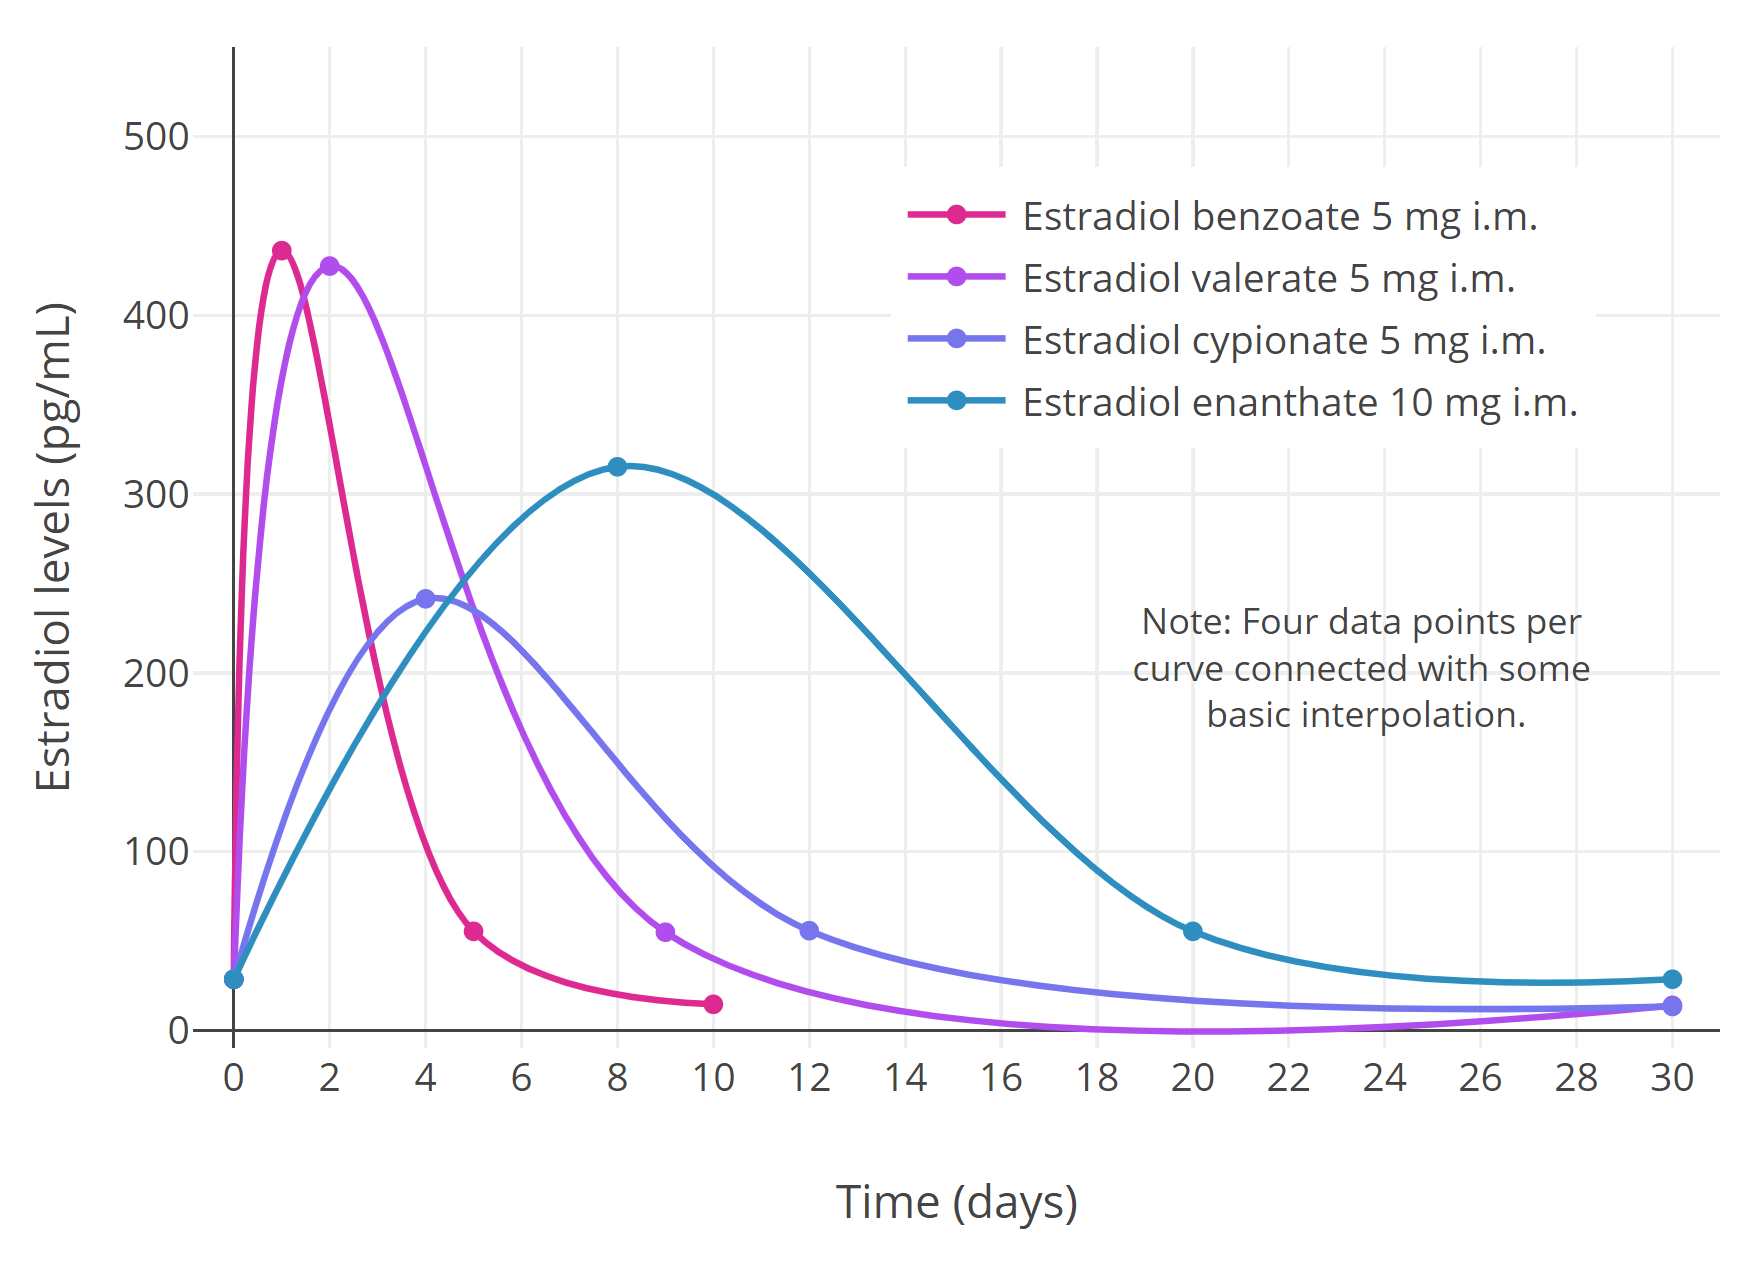 Levels of estradiol over time for various esters